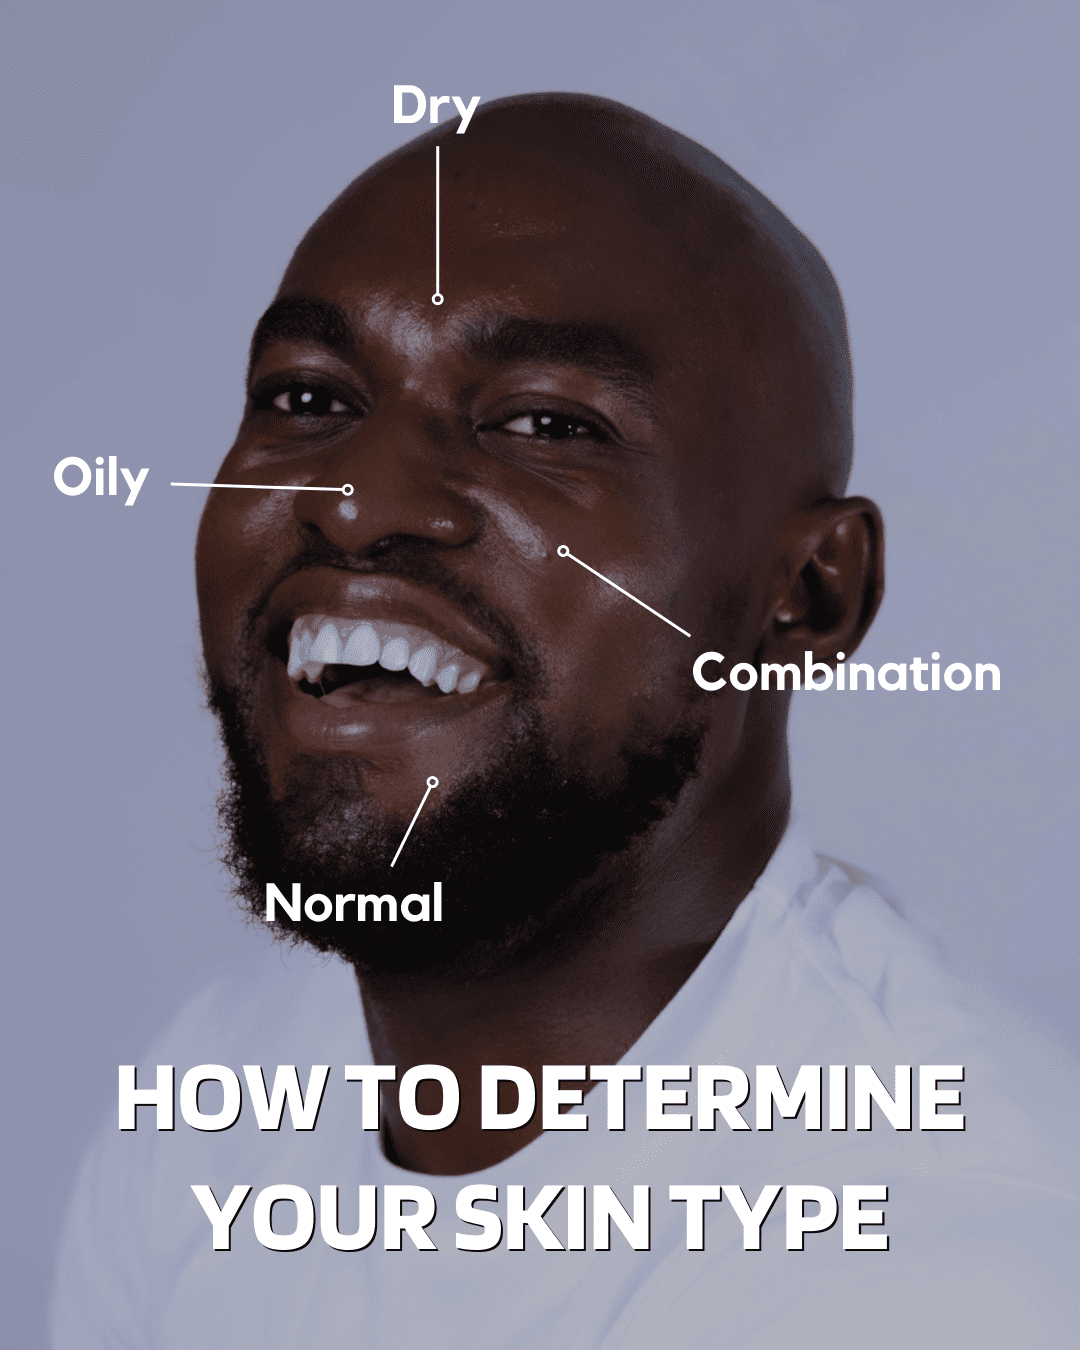 oily, dry, combination and normal skin types. find out from Nyon Derma